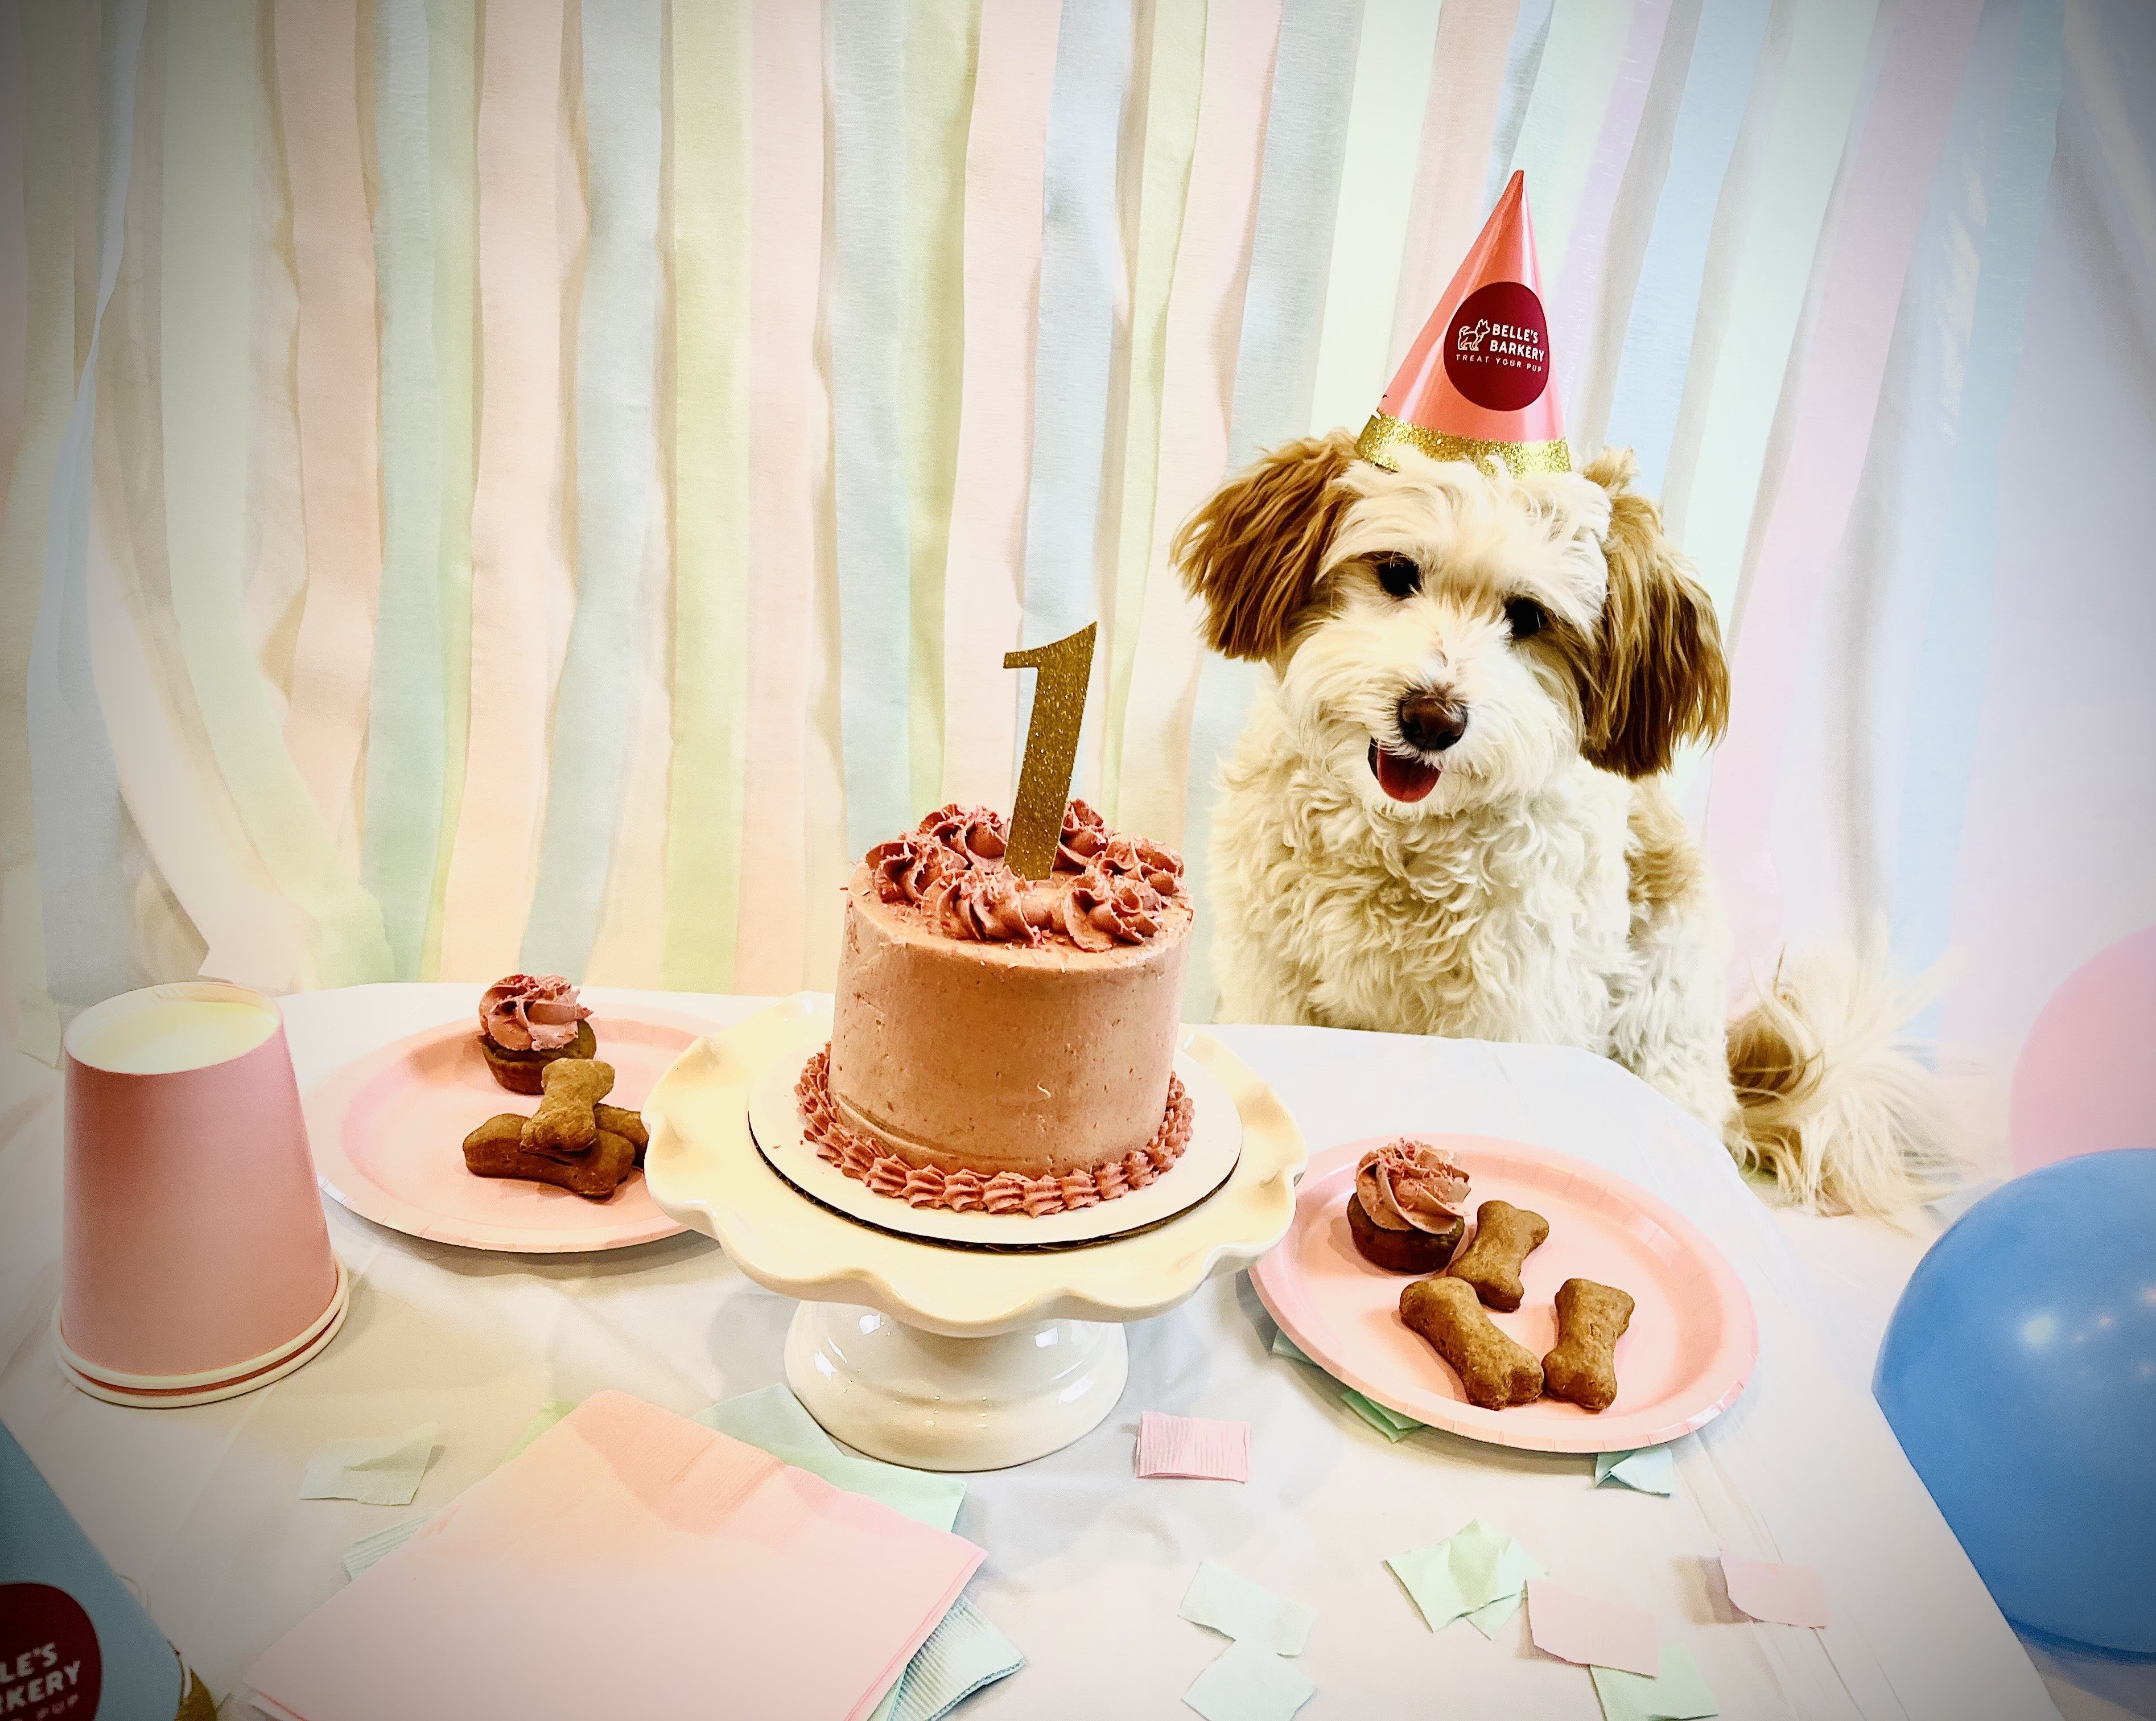 Cute fluffy dog having a birthday party with custom dog cake and birthday hat.